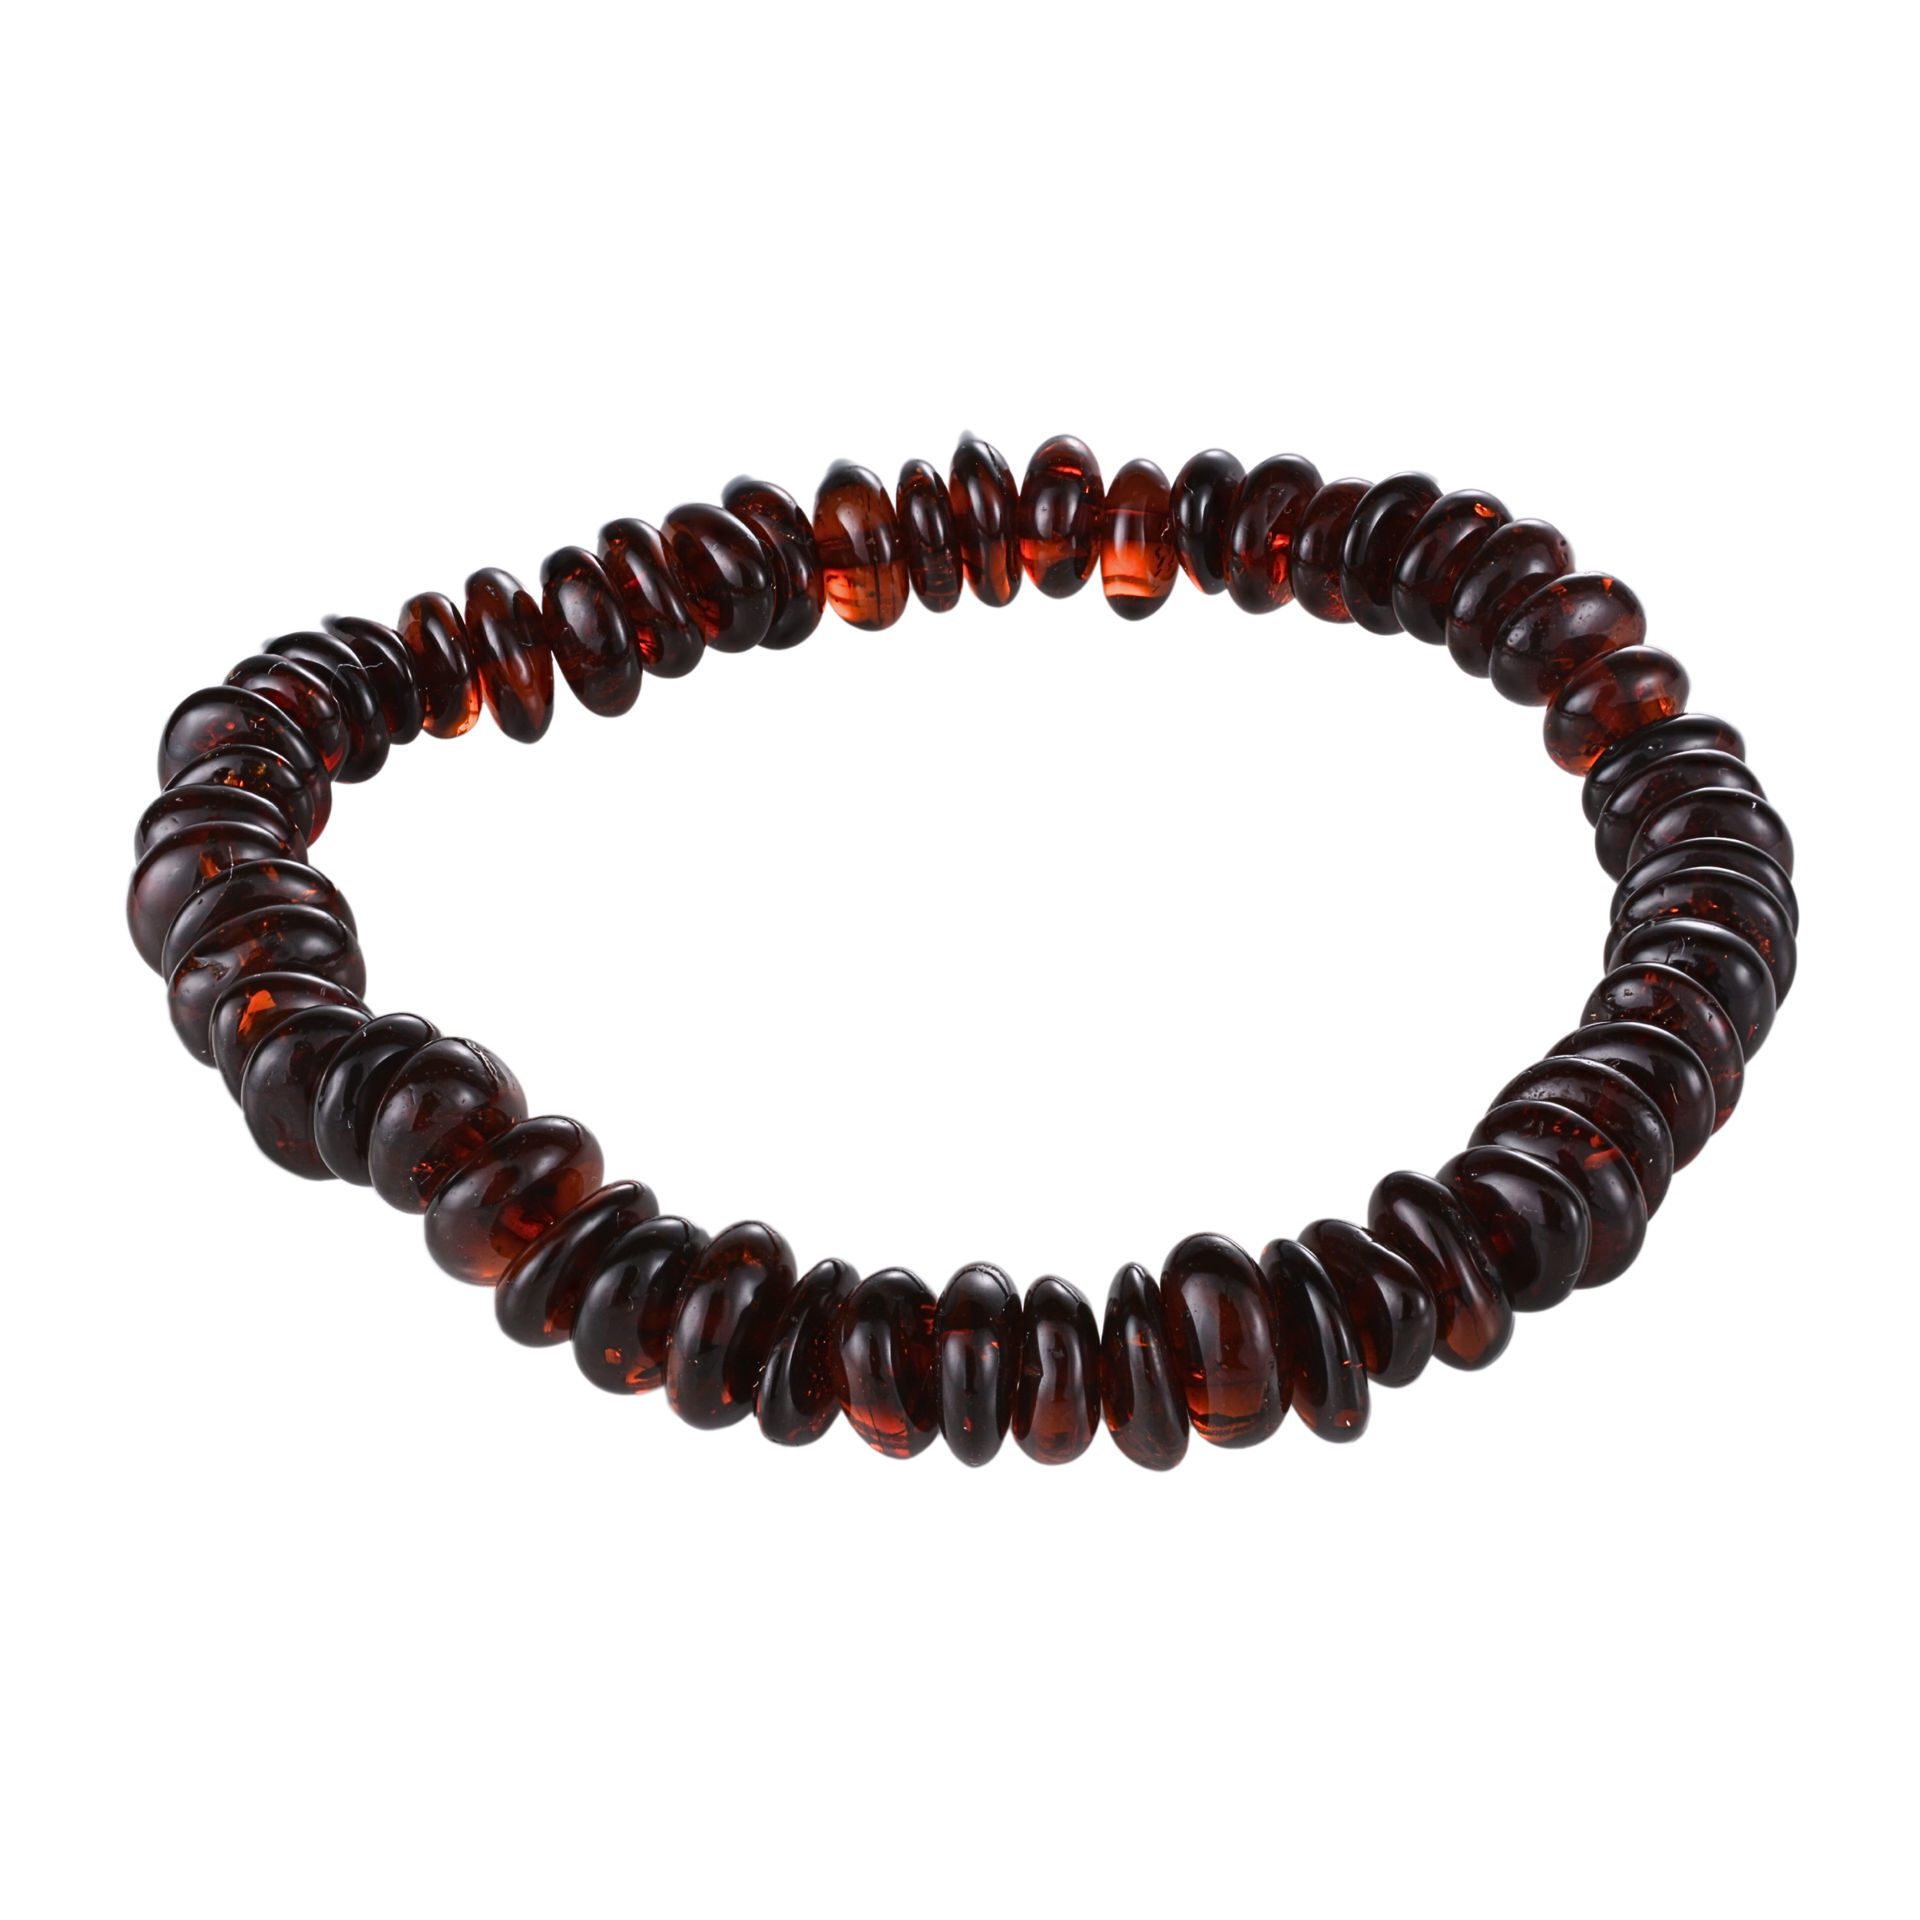 Buy AMBERAGE Natural Baltic Amber Bracelet for Adults (Women/Men) - Hand  Raw-Unpolished/Certified Baltic Amber Beads(6 Colors) (7, Raw-Unpolished  Dark Cherry) at Amazon.in